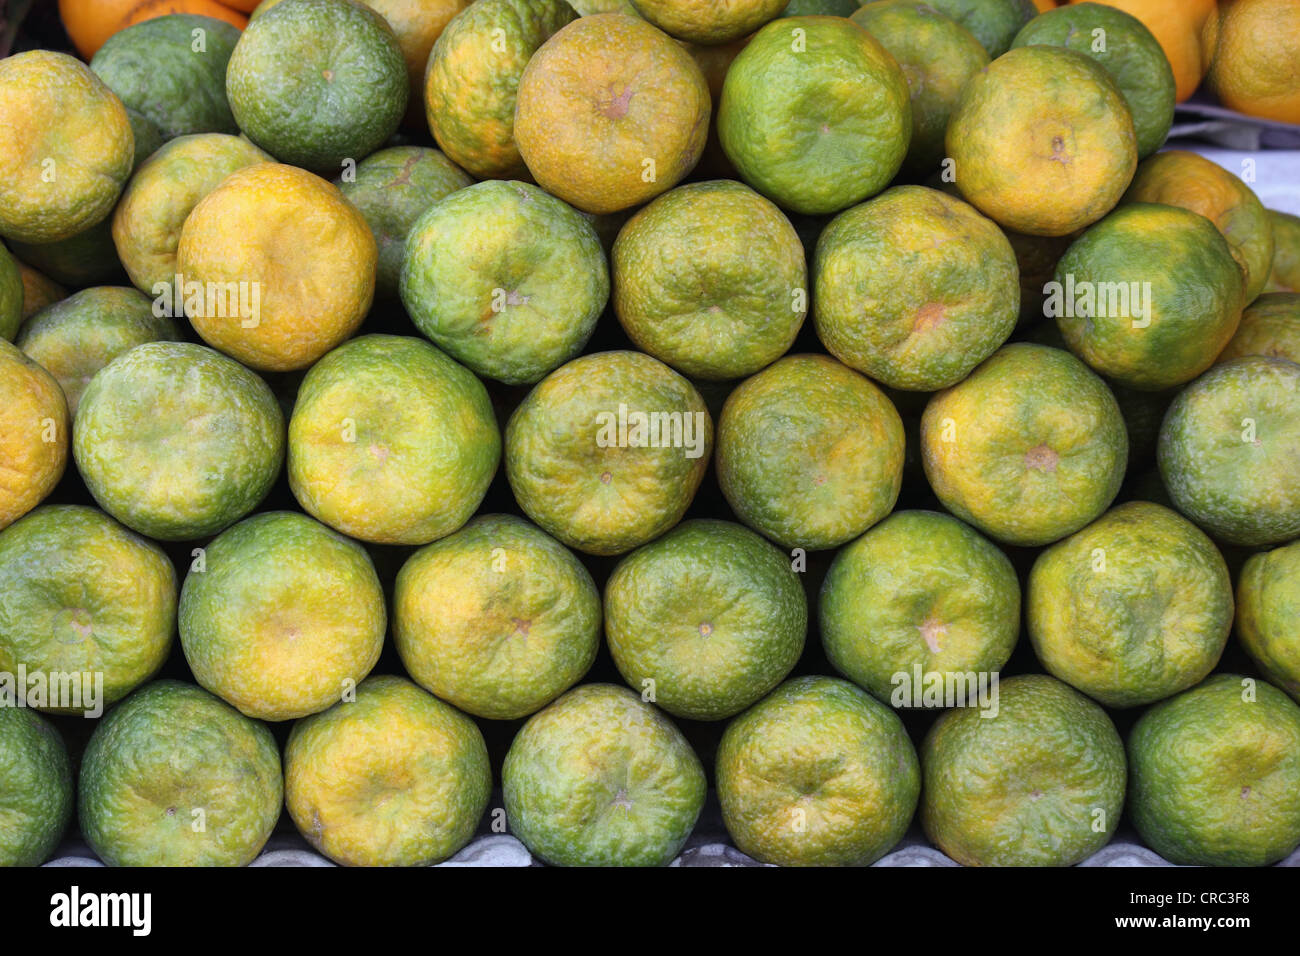 Sweet lime (Citrus limetta) fruit for sale in market at Pune, India Stock Photo